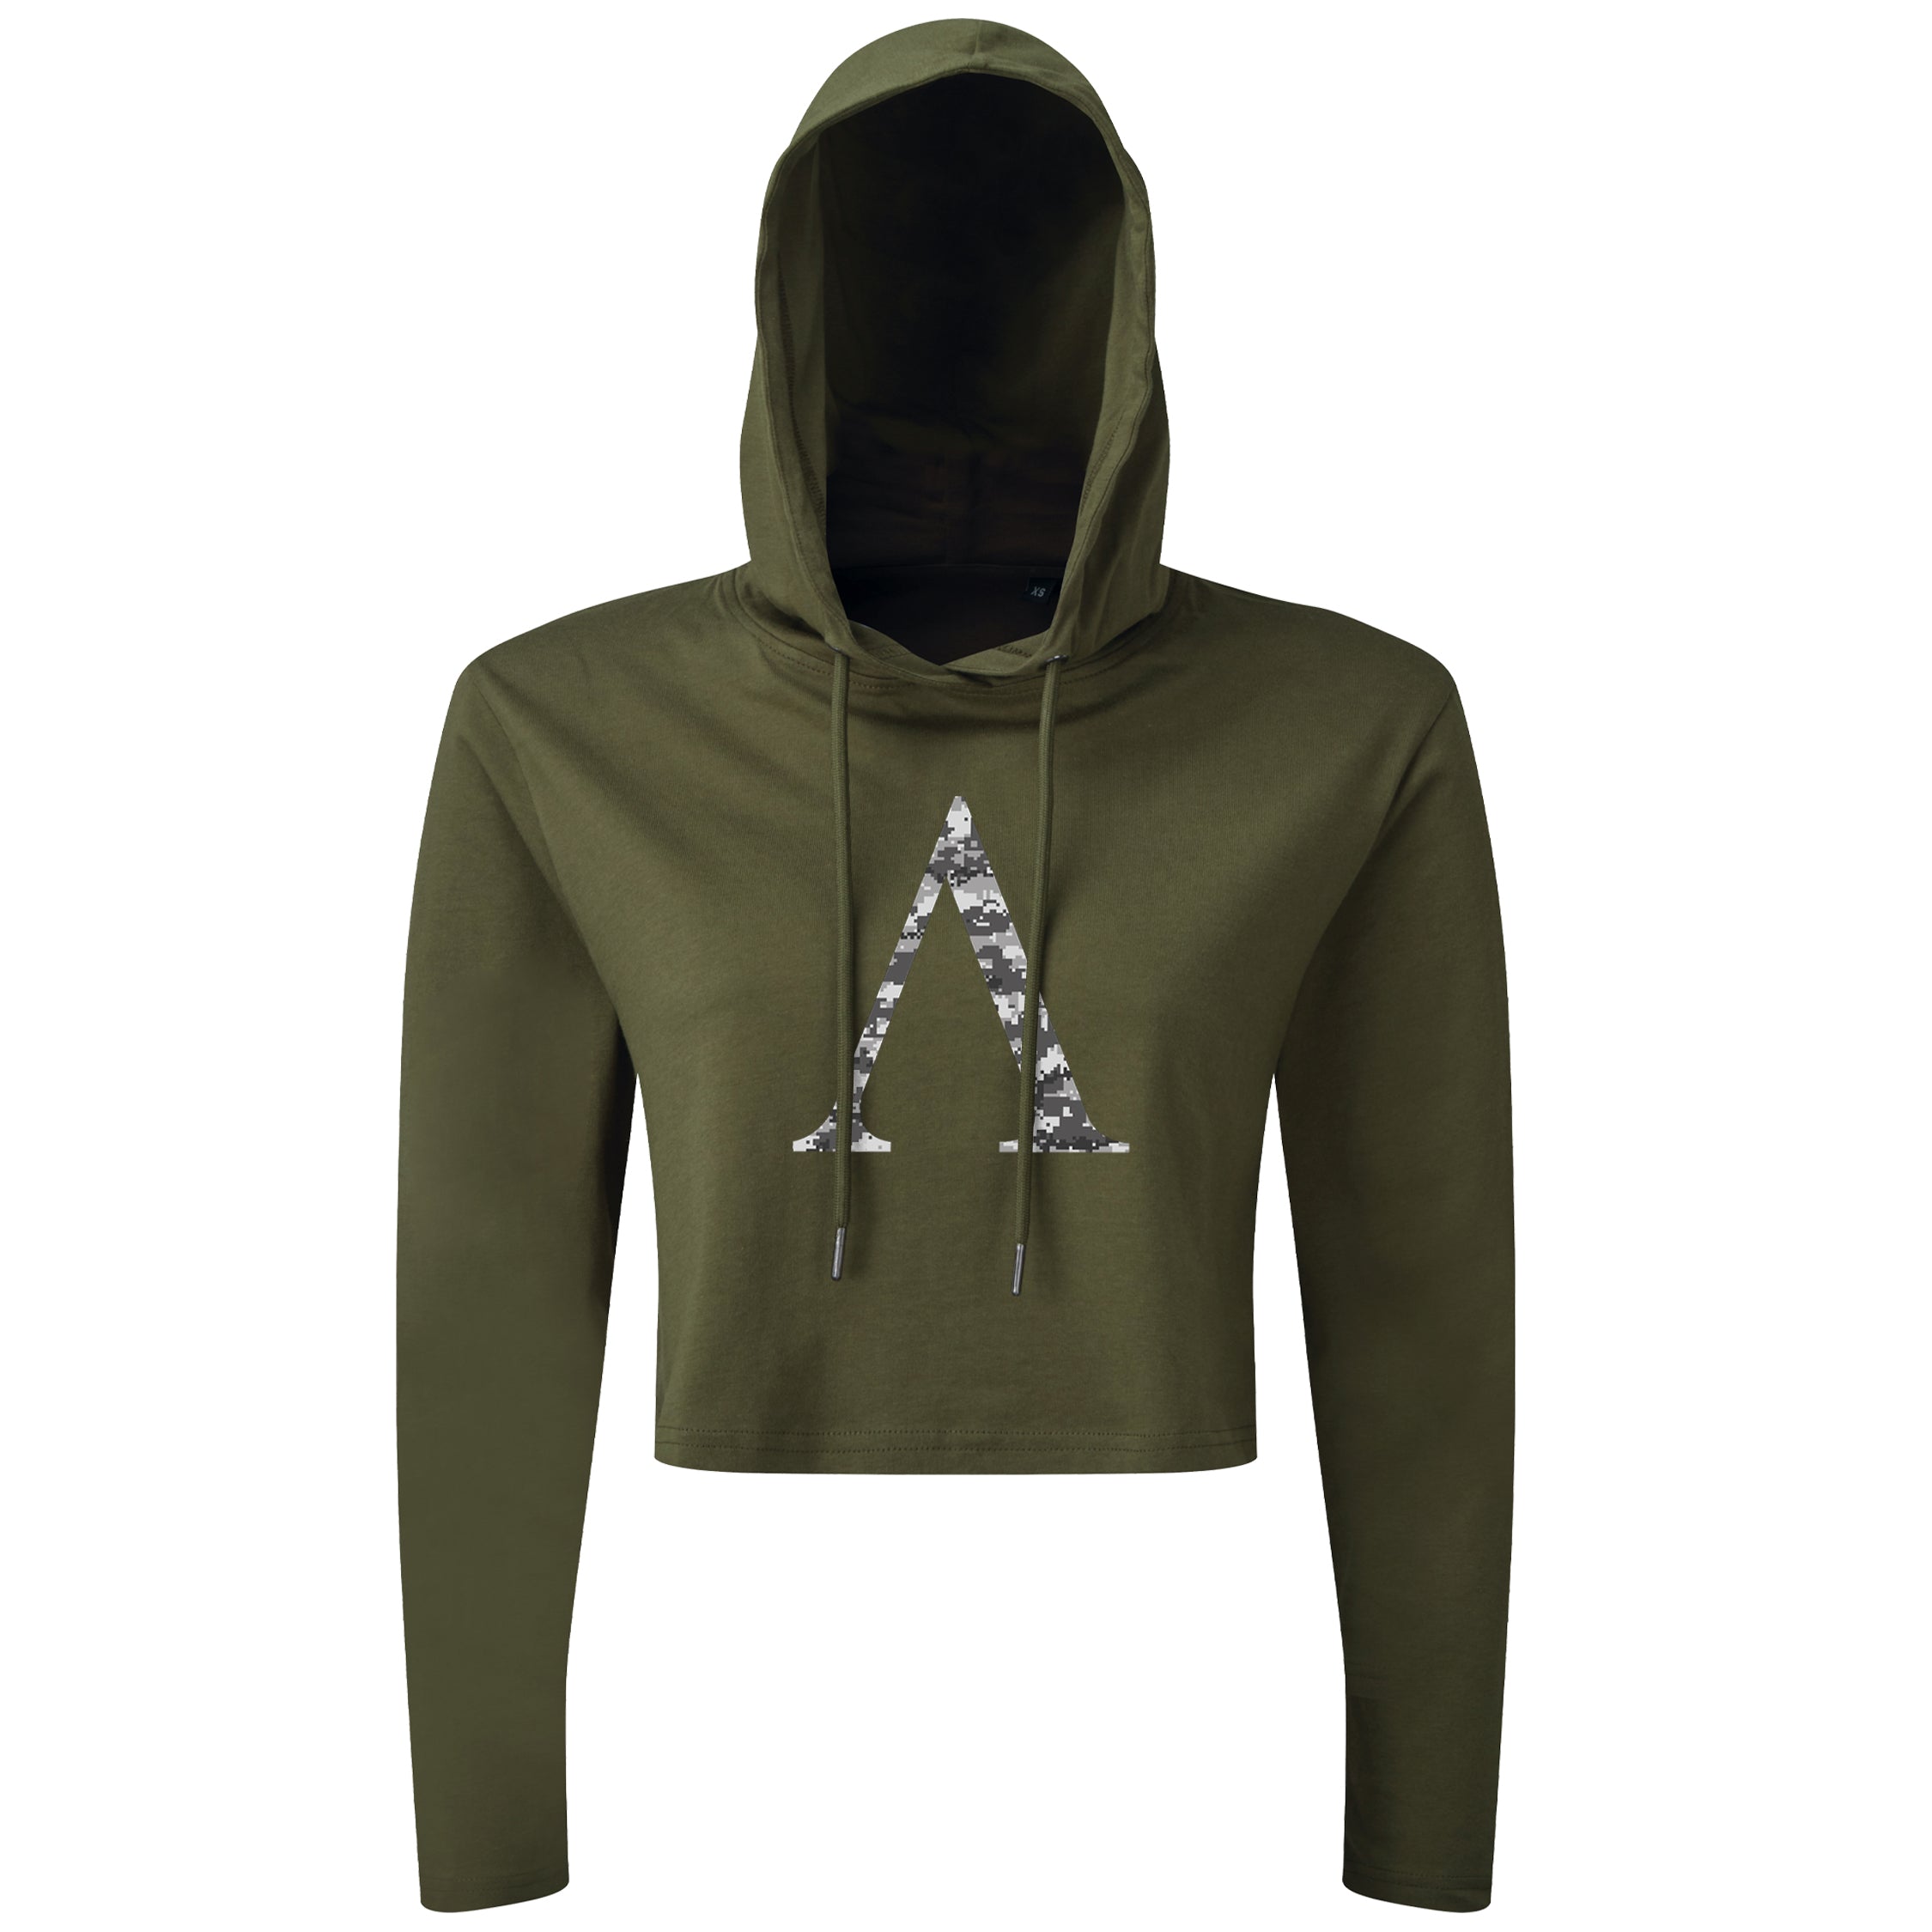 Spartan Symbol Winter Camo - Spartan Forged - Cropped Hoodie